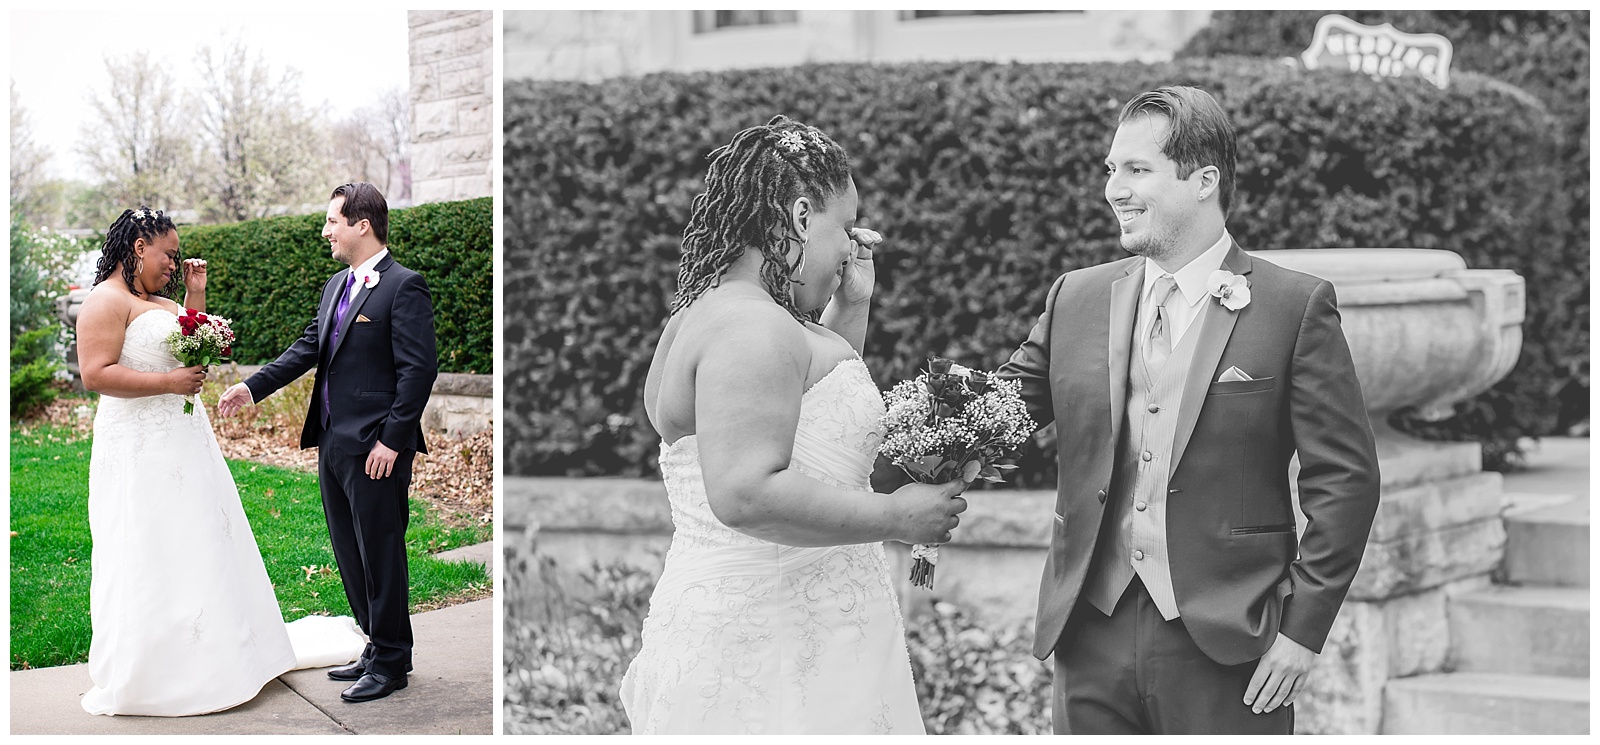 Wedding photography at Simpson House in Kansas City, captured by Wisdom-Watson Weddings.